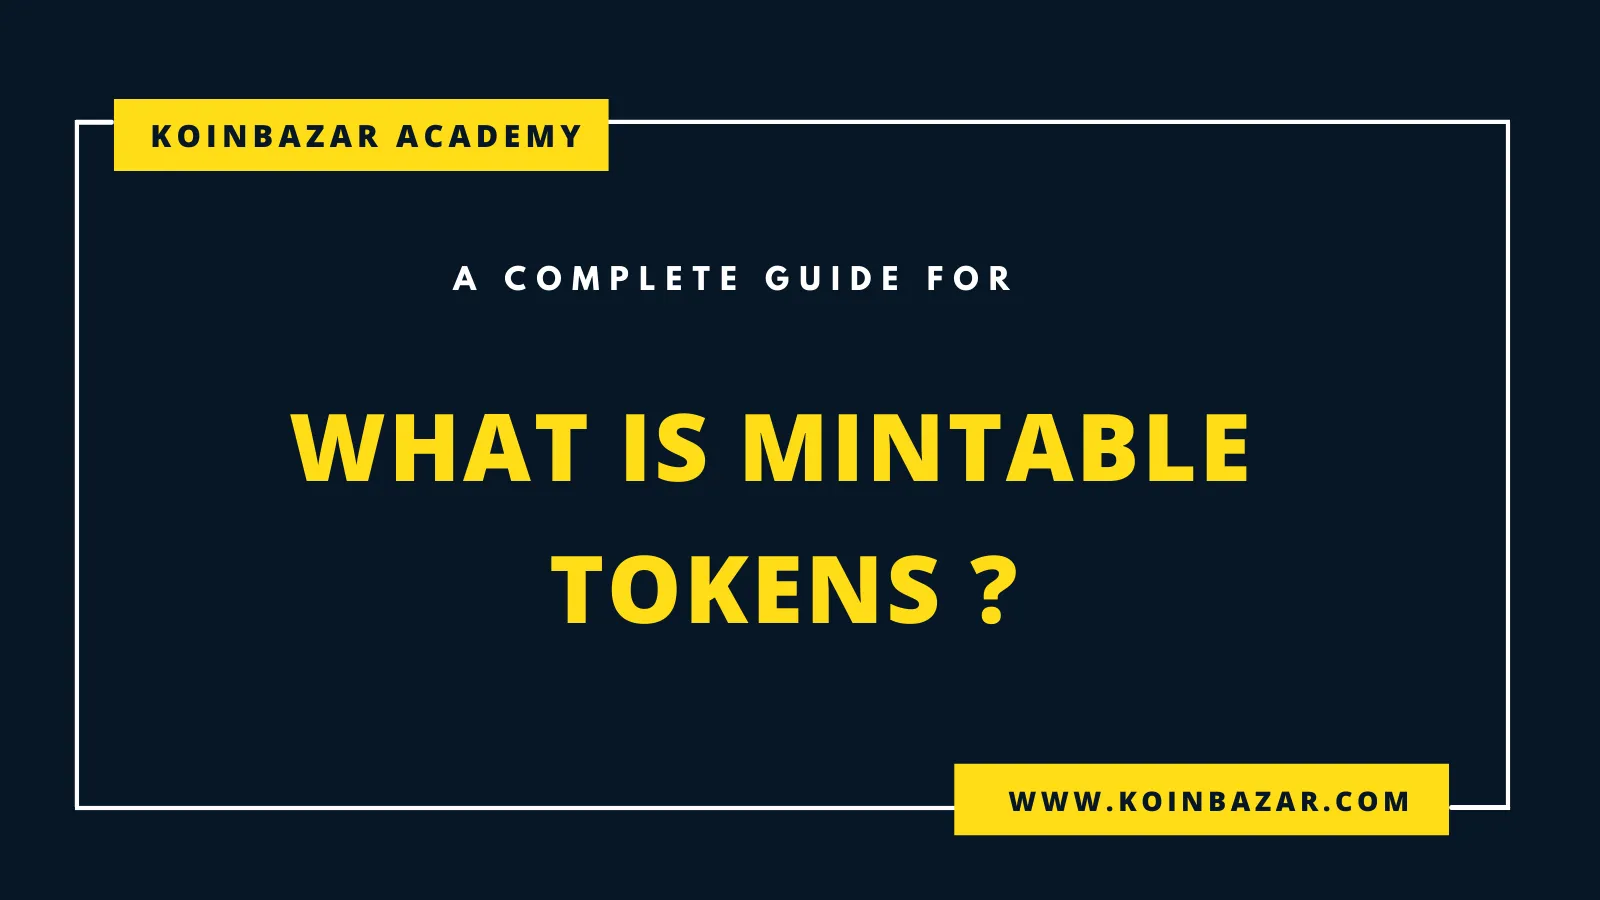 What is Mintable Token ?